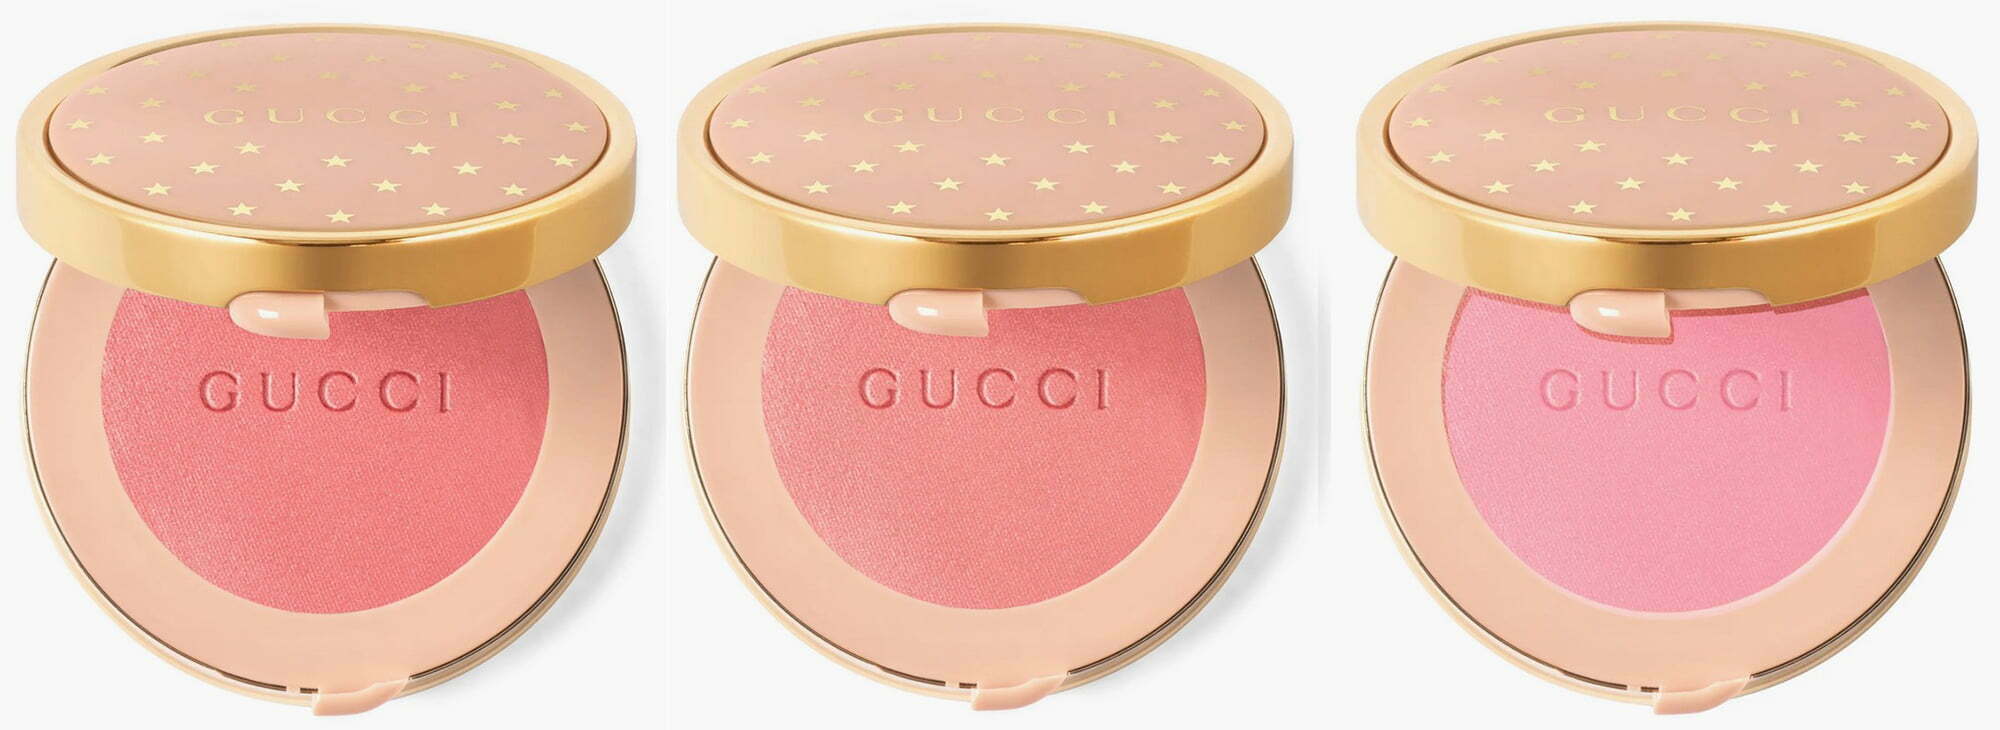 GUCCI has released 3 new shades off Luminous Matte Beauty Blush